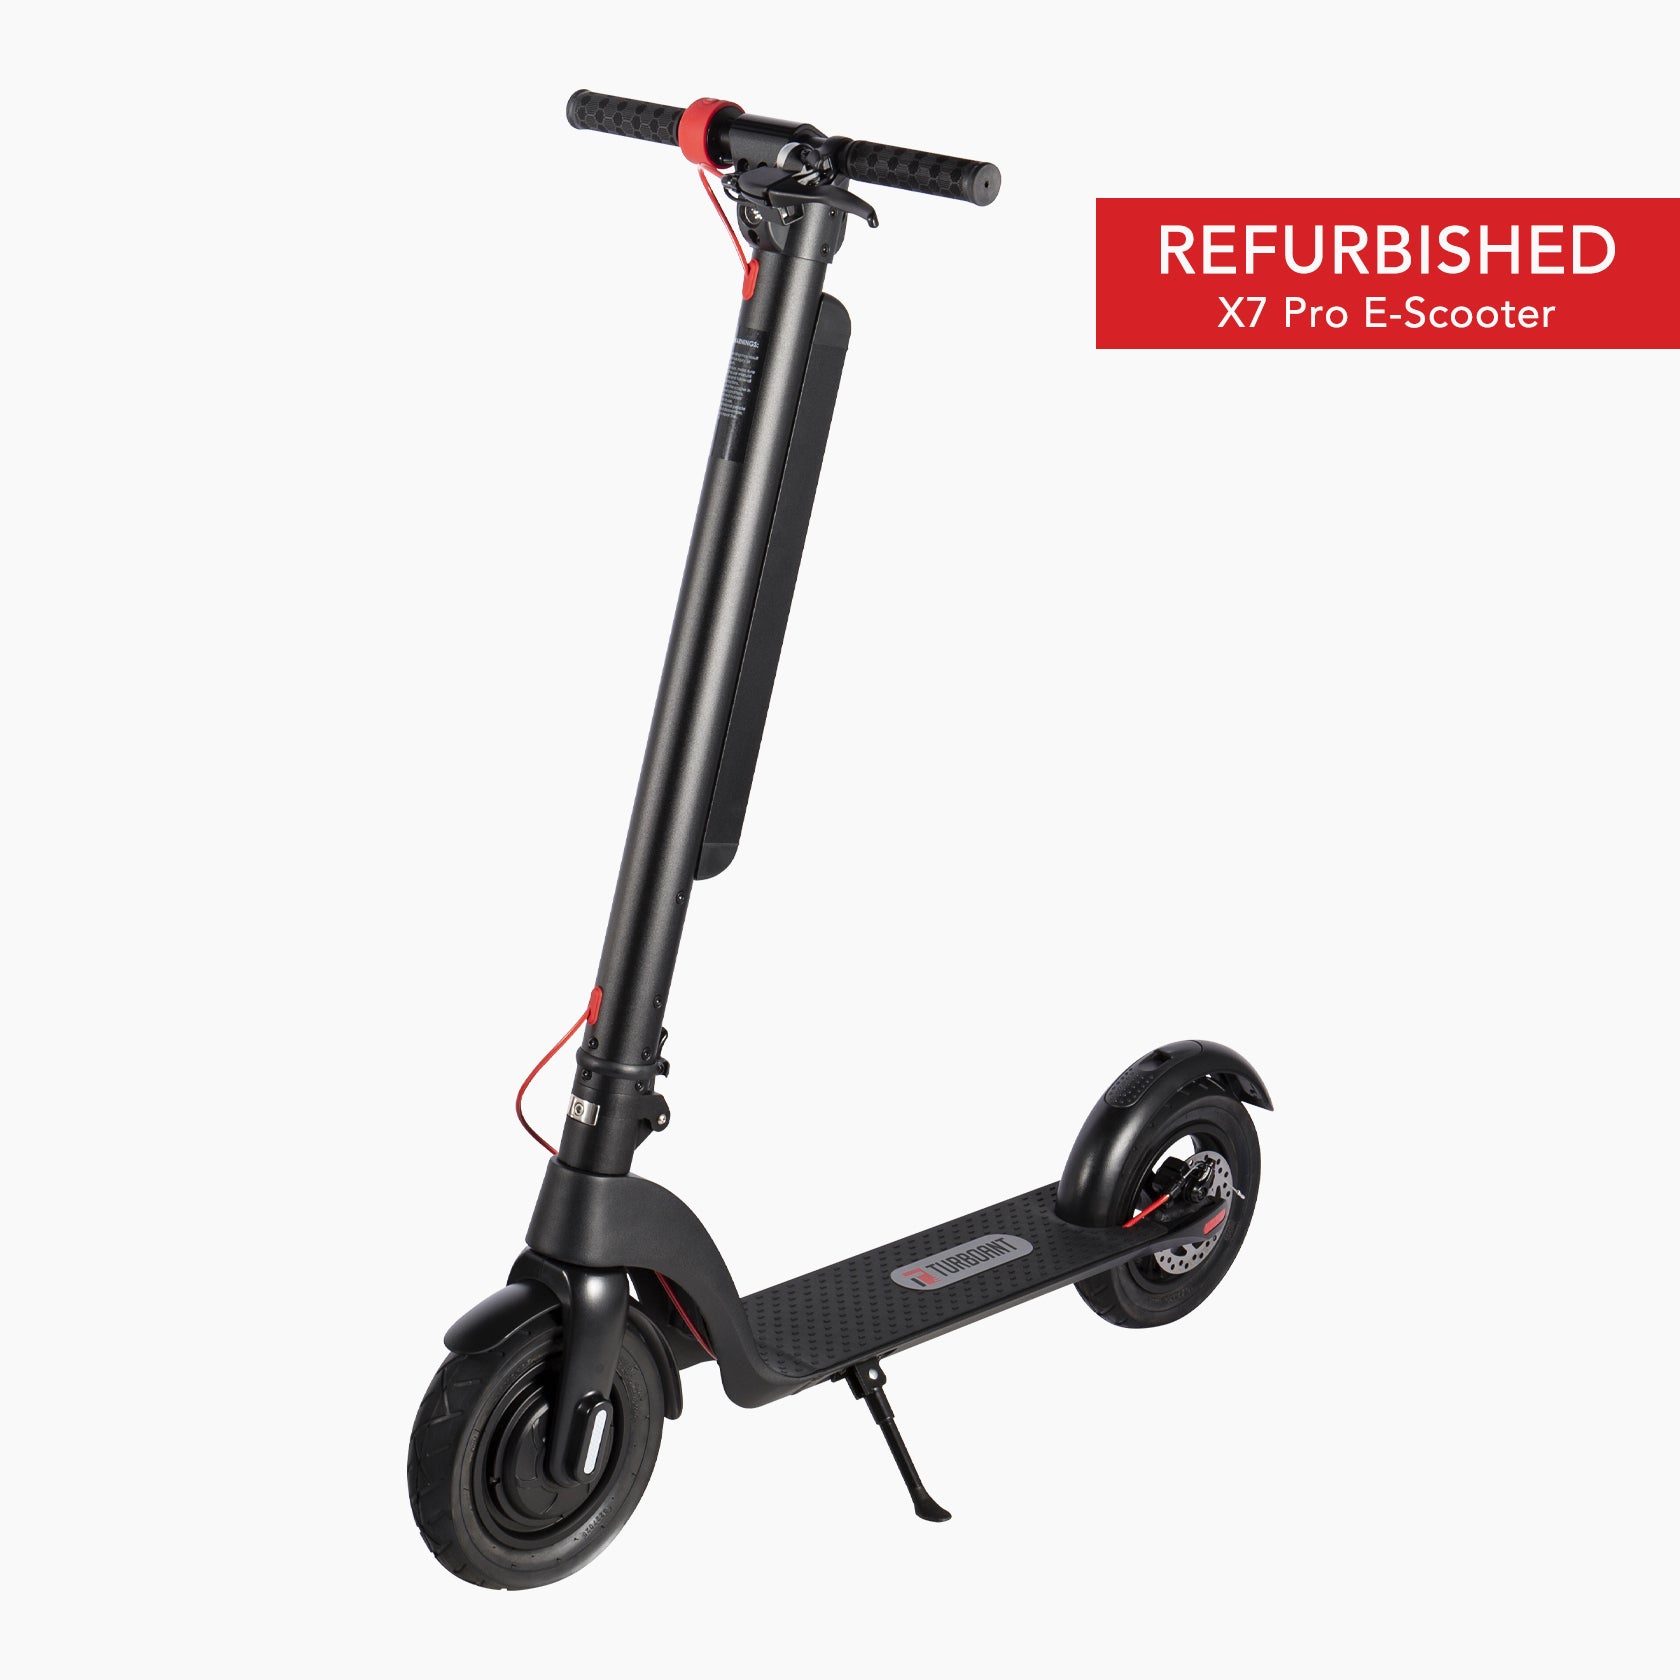 X7 Pro Scooter on Sale | TurboAnt